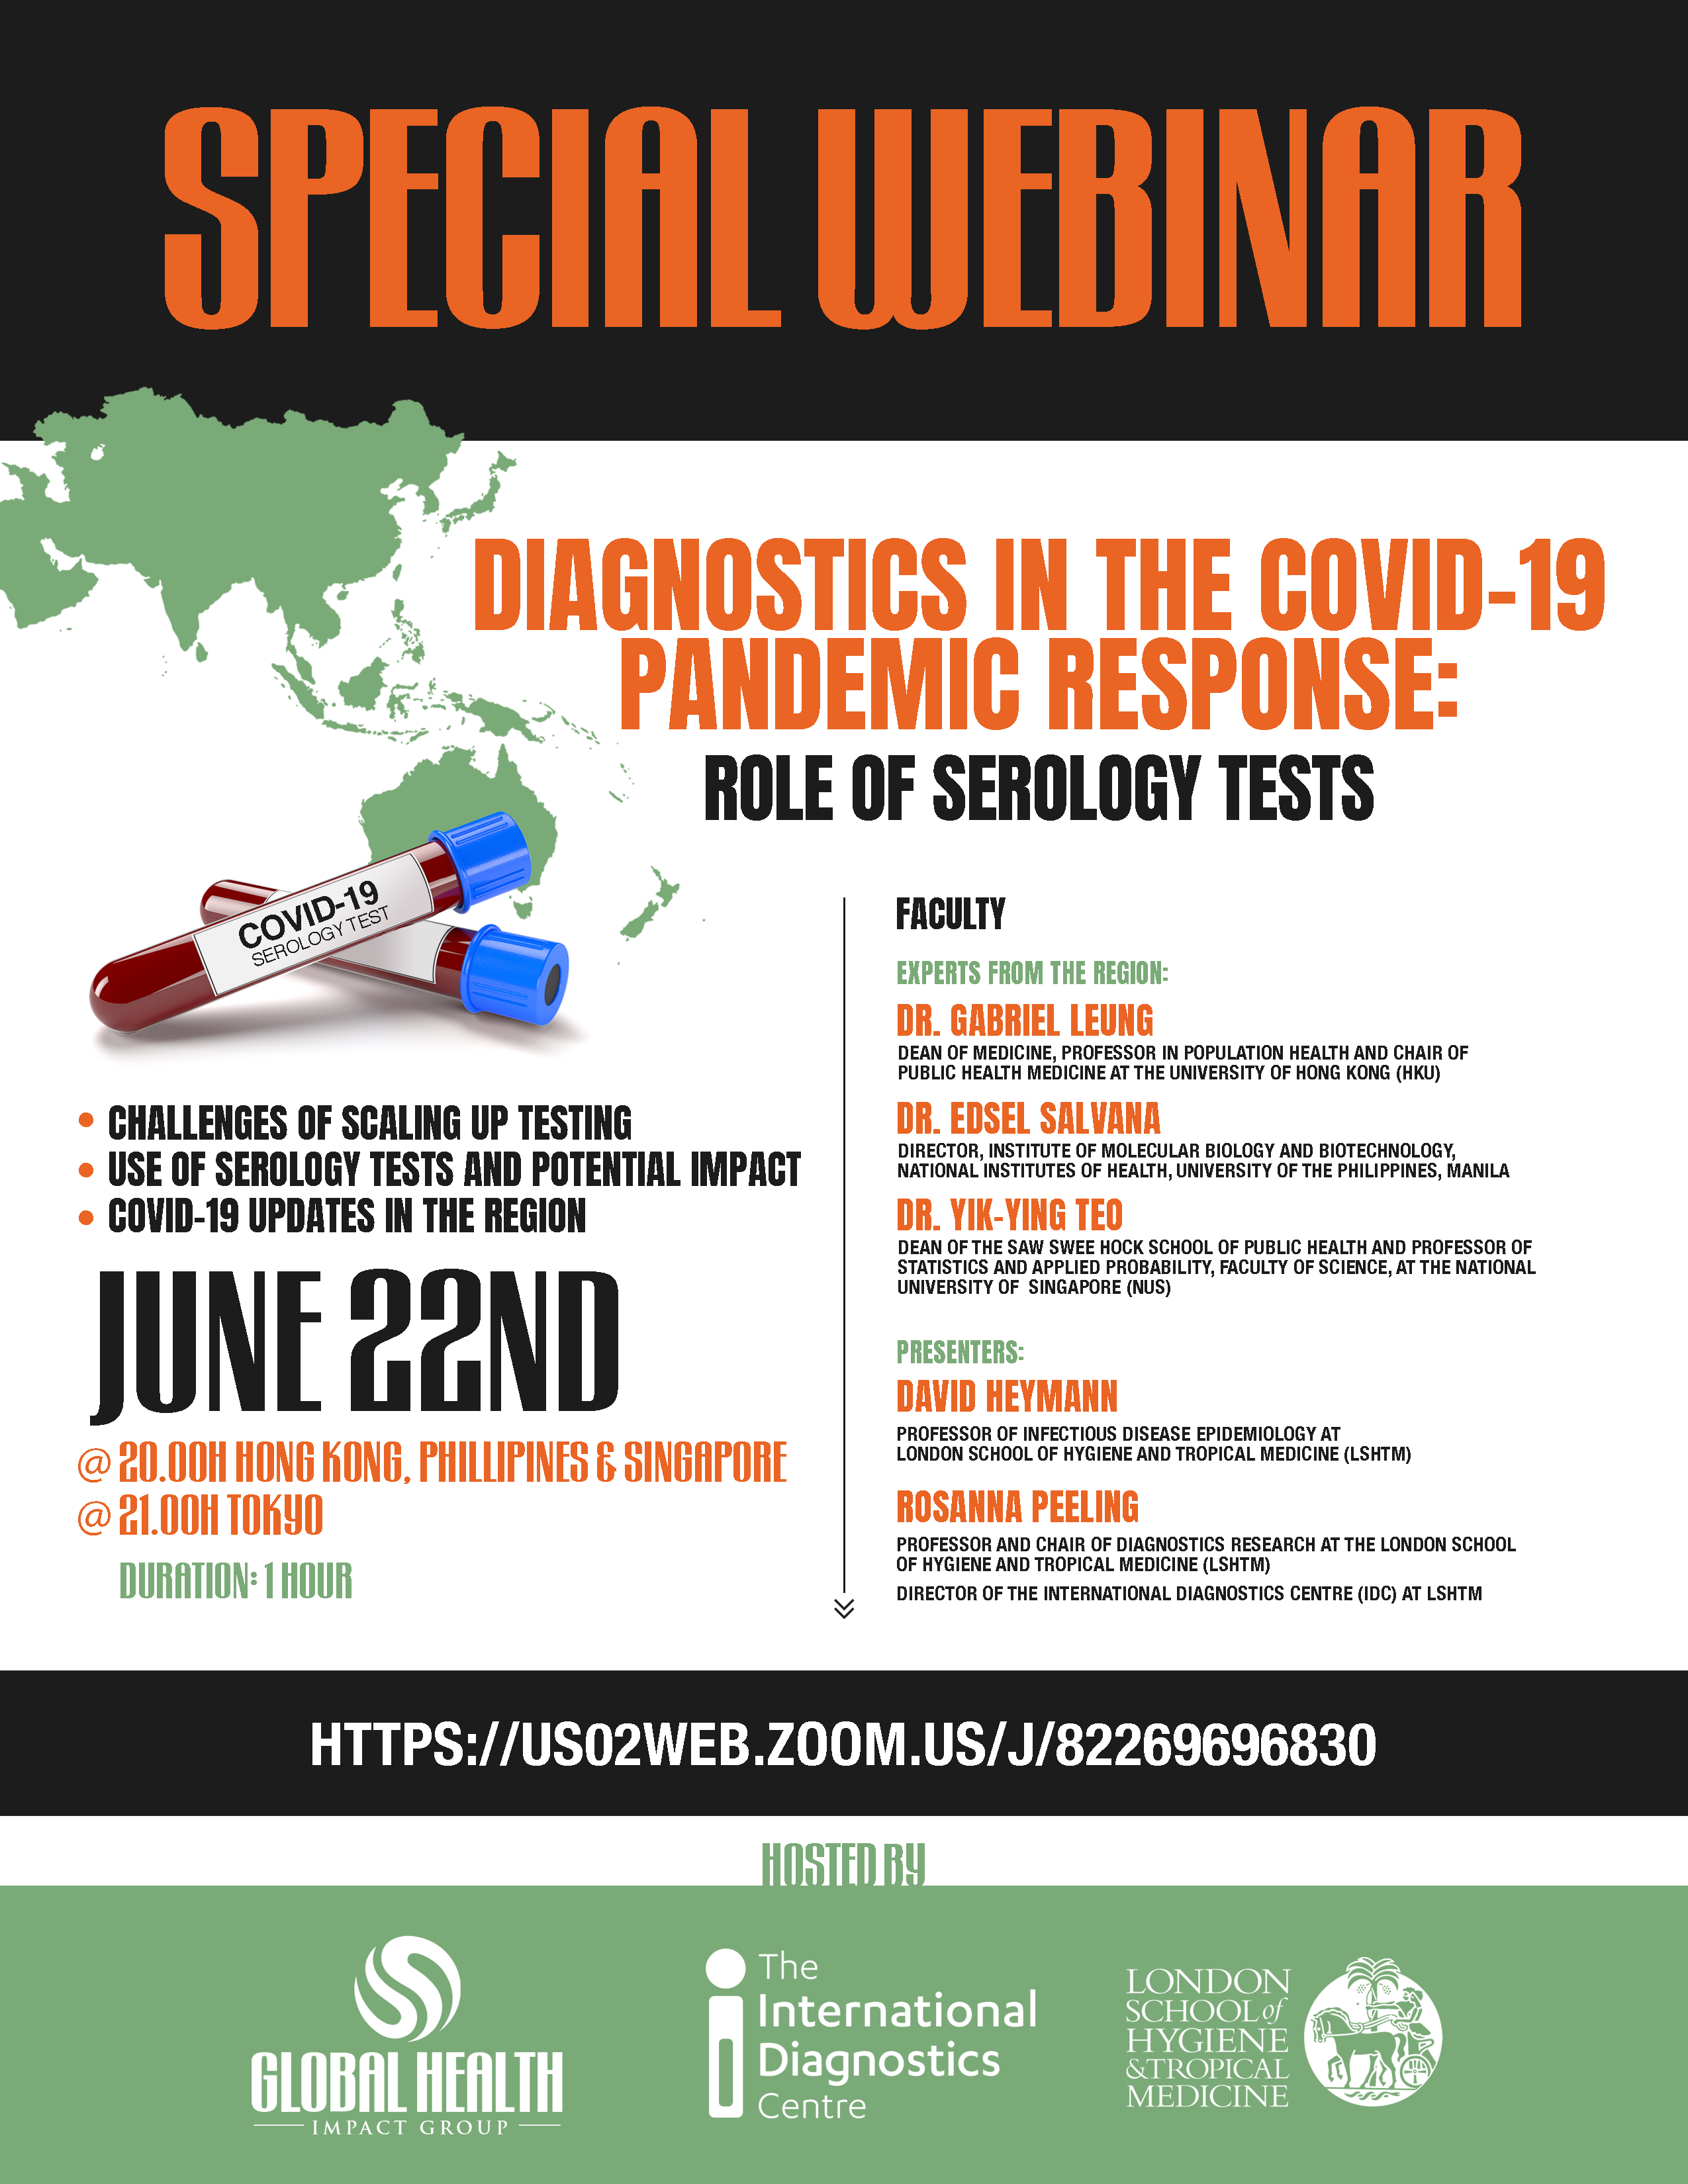 LSHTM webinar on Diagnostics in the COVID-19 Pandemic Response: Role of Serology Tests